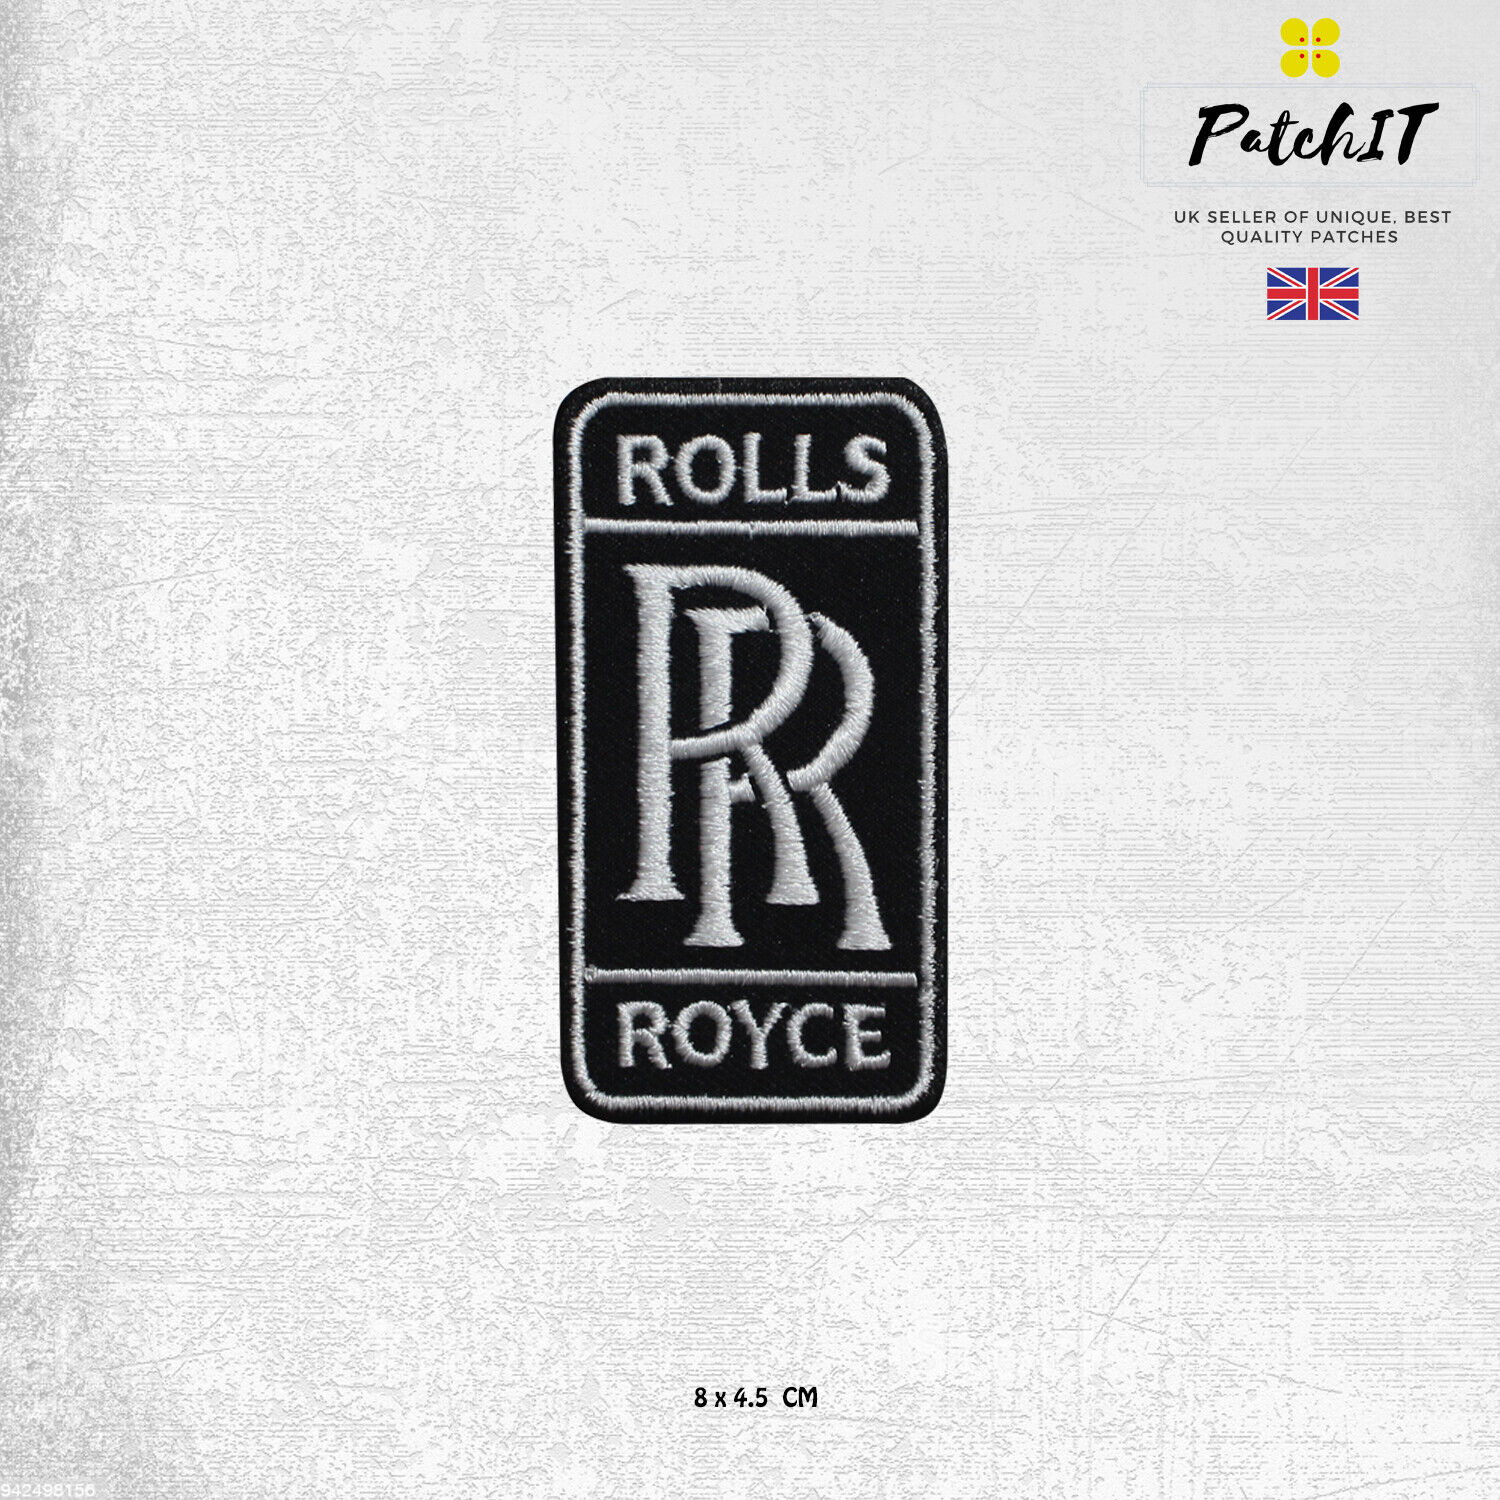 Rolls Royce Black Motor Car Logo Patch Iron On Patch Sew On Badge Embroidered Pa